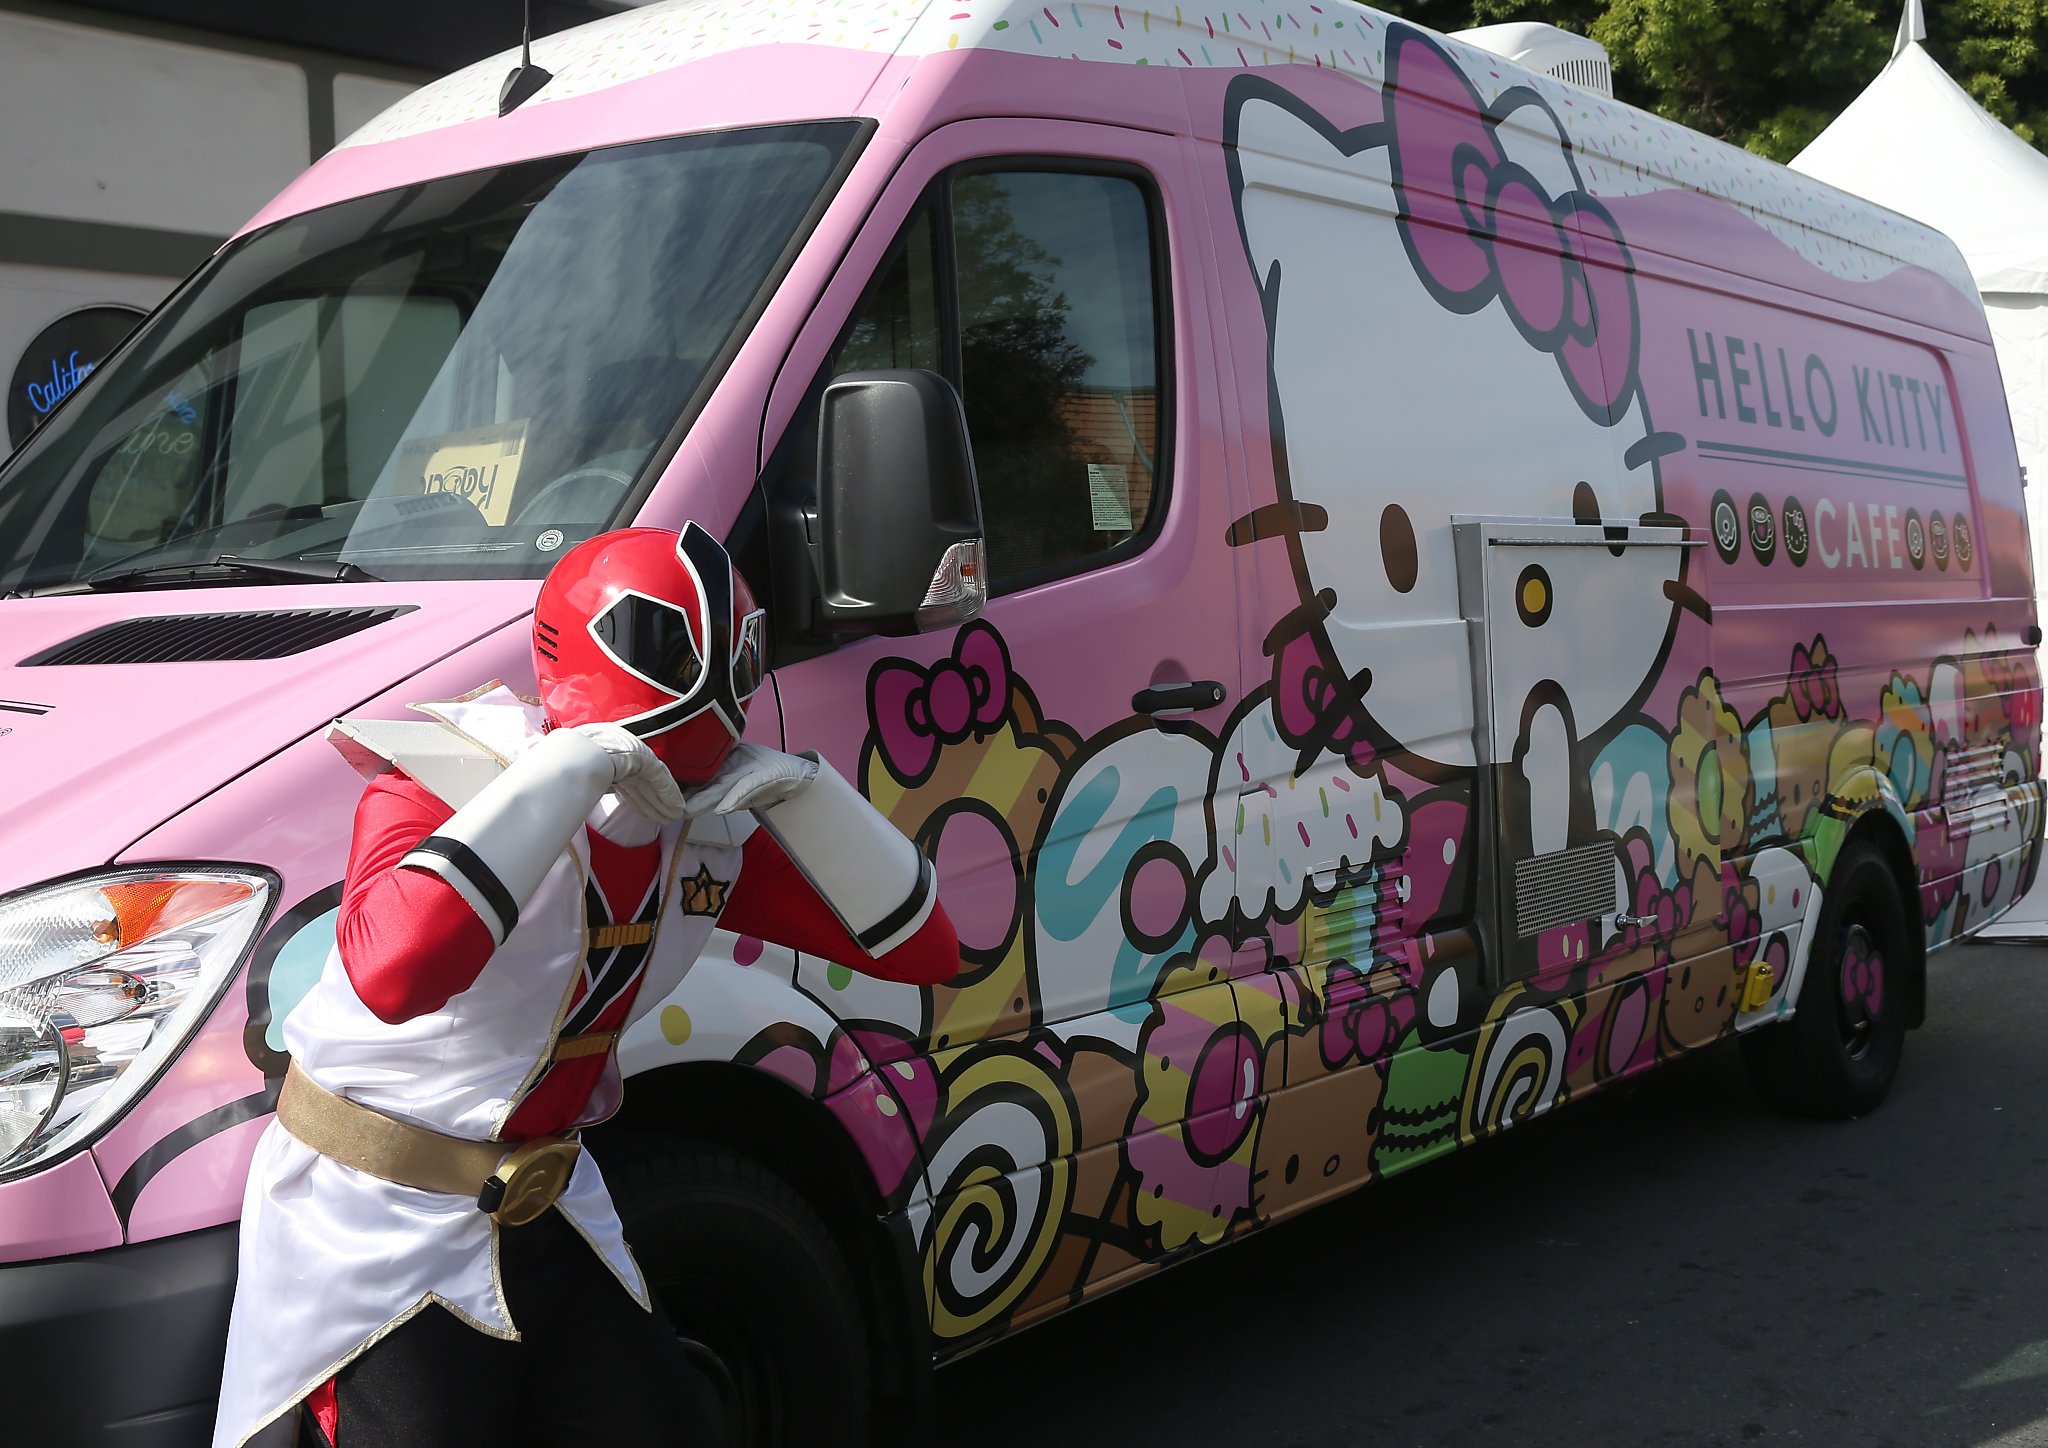 Hello Kitty Cafe Pop-Up Truck Returns to Southern California – NBC Los  Angeles